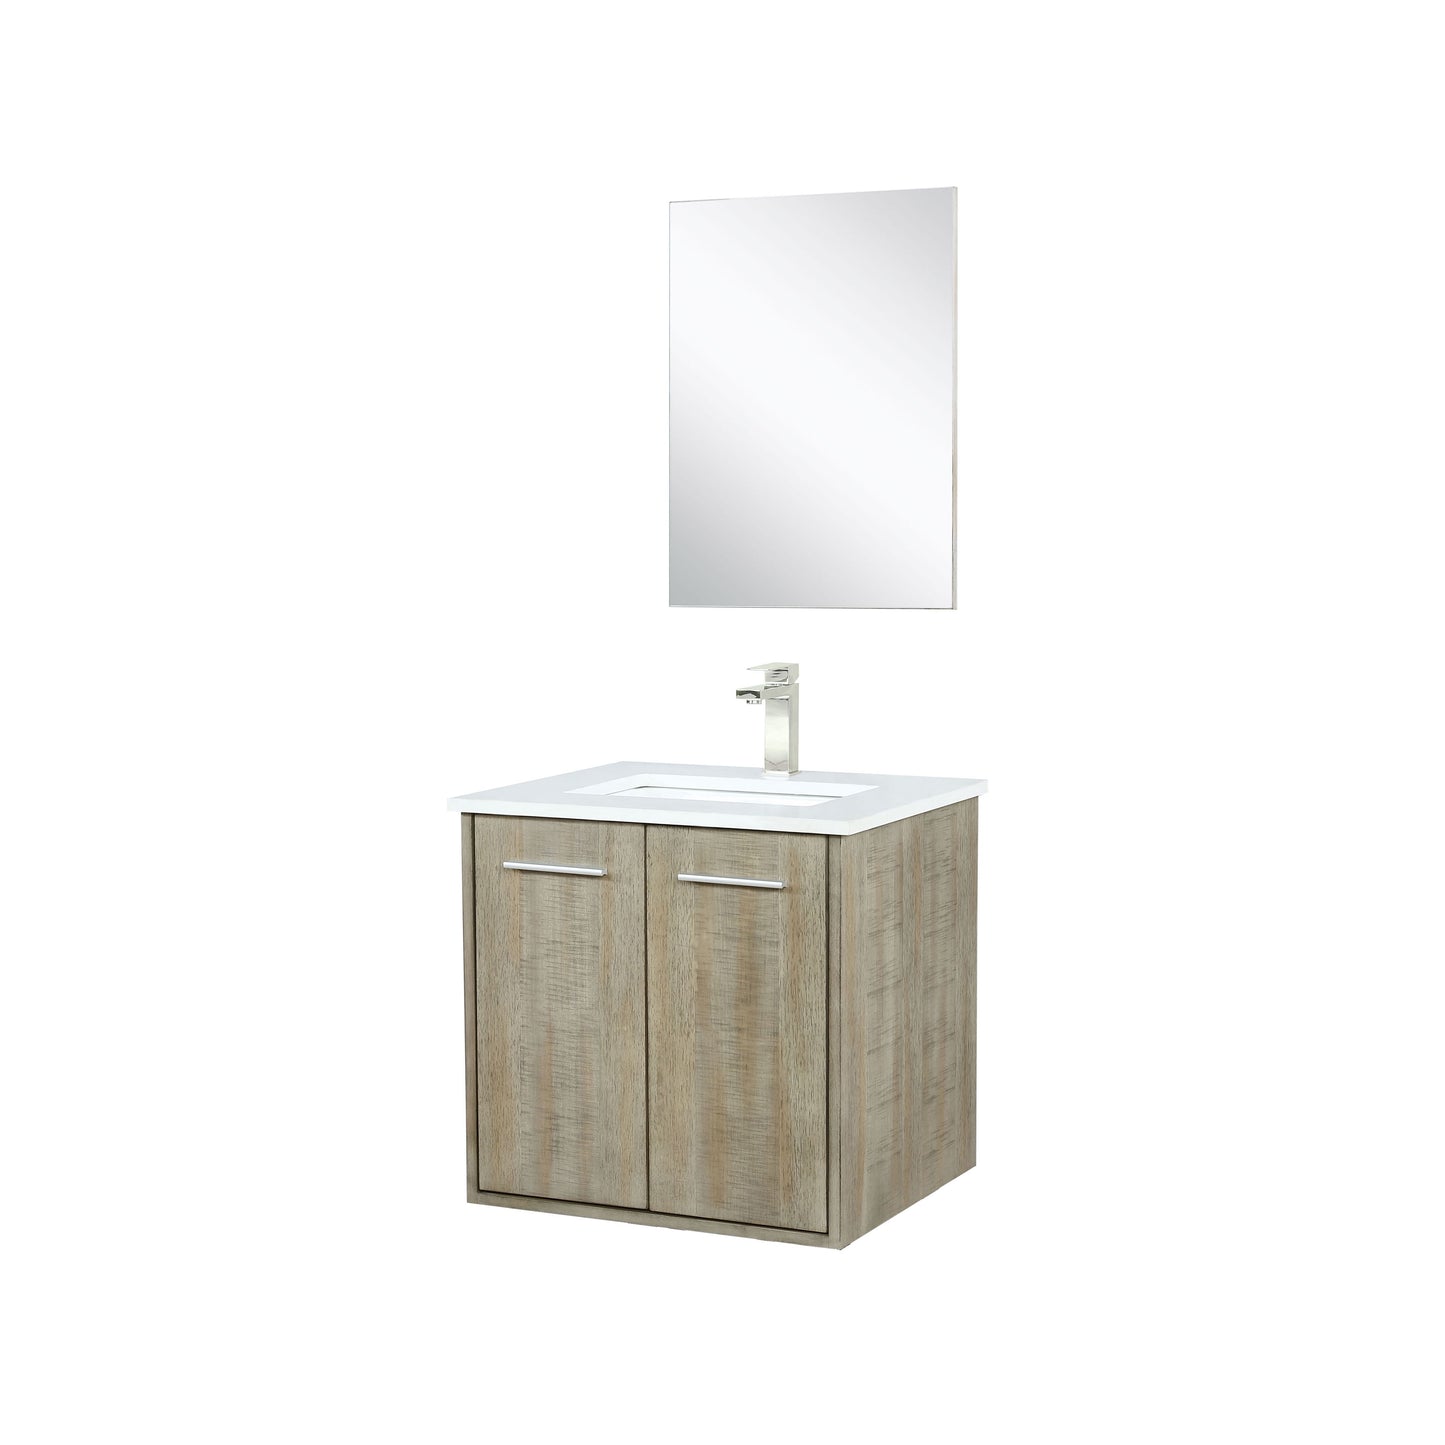 Lexora Collection Fairbanks 24 inch Rustic Acacia Bath Vanity, Cultured Marble Top, Faucet Set and 18 inch Mirror - Luxe Bathroom Vanities